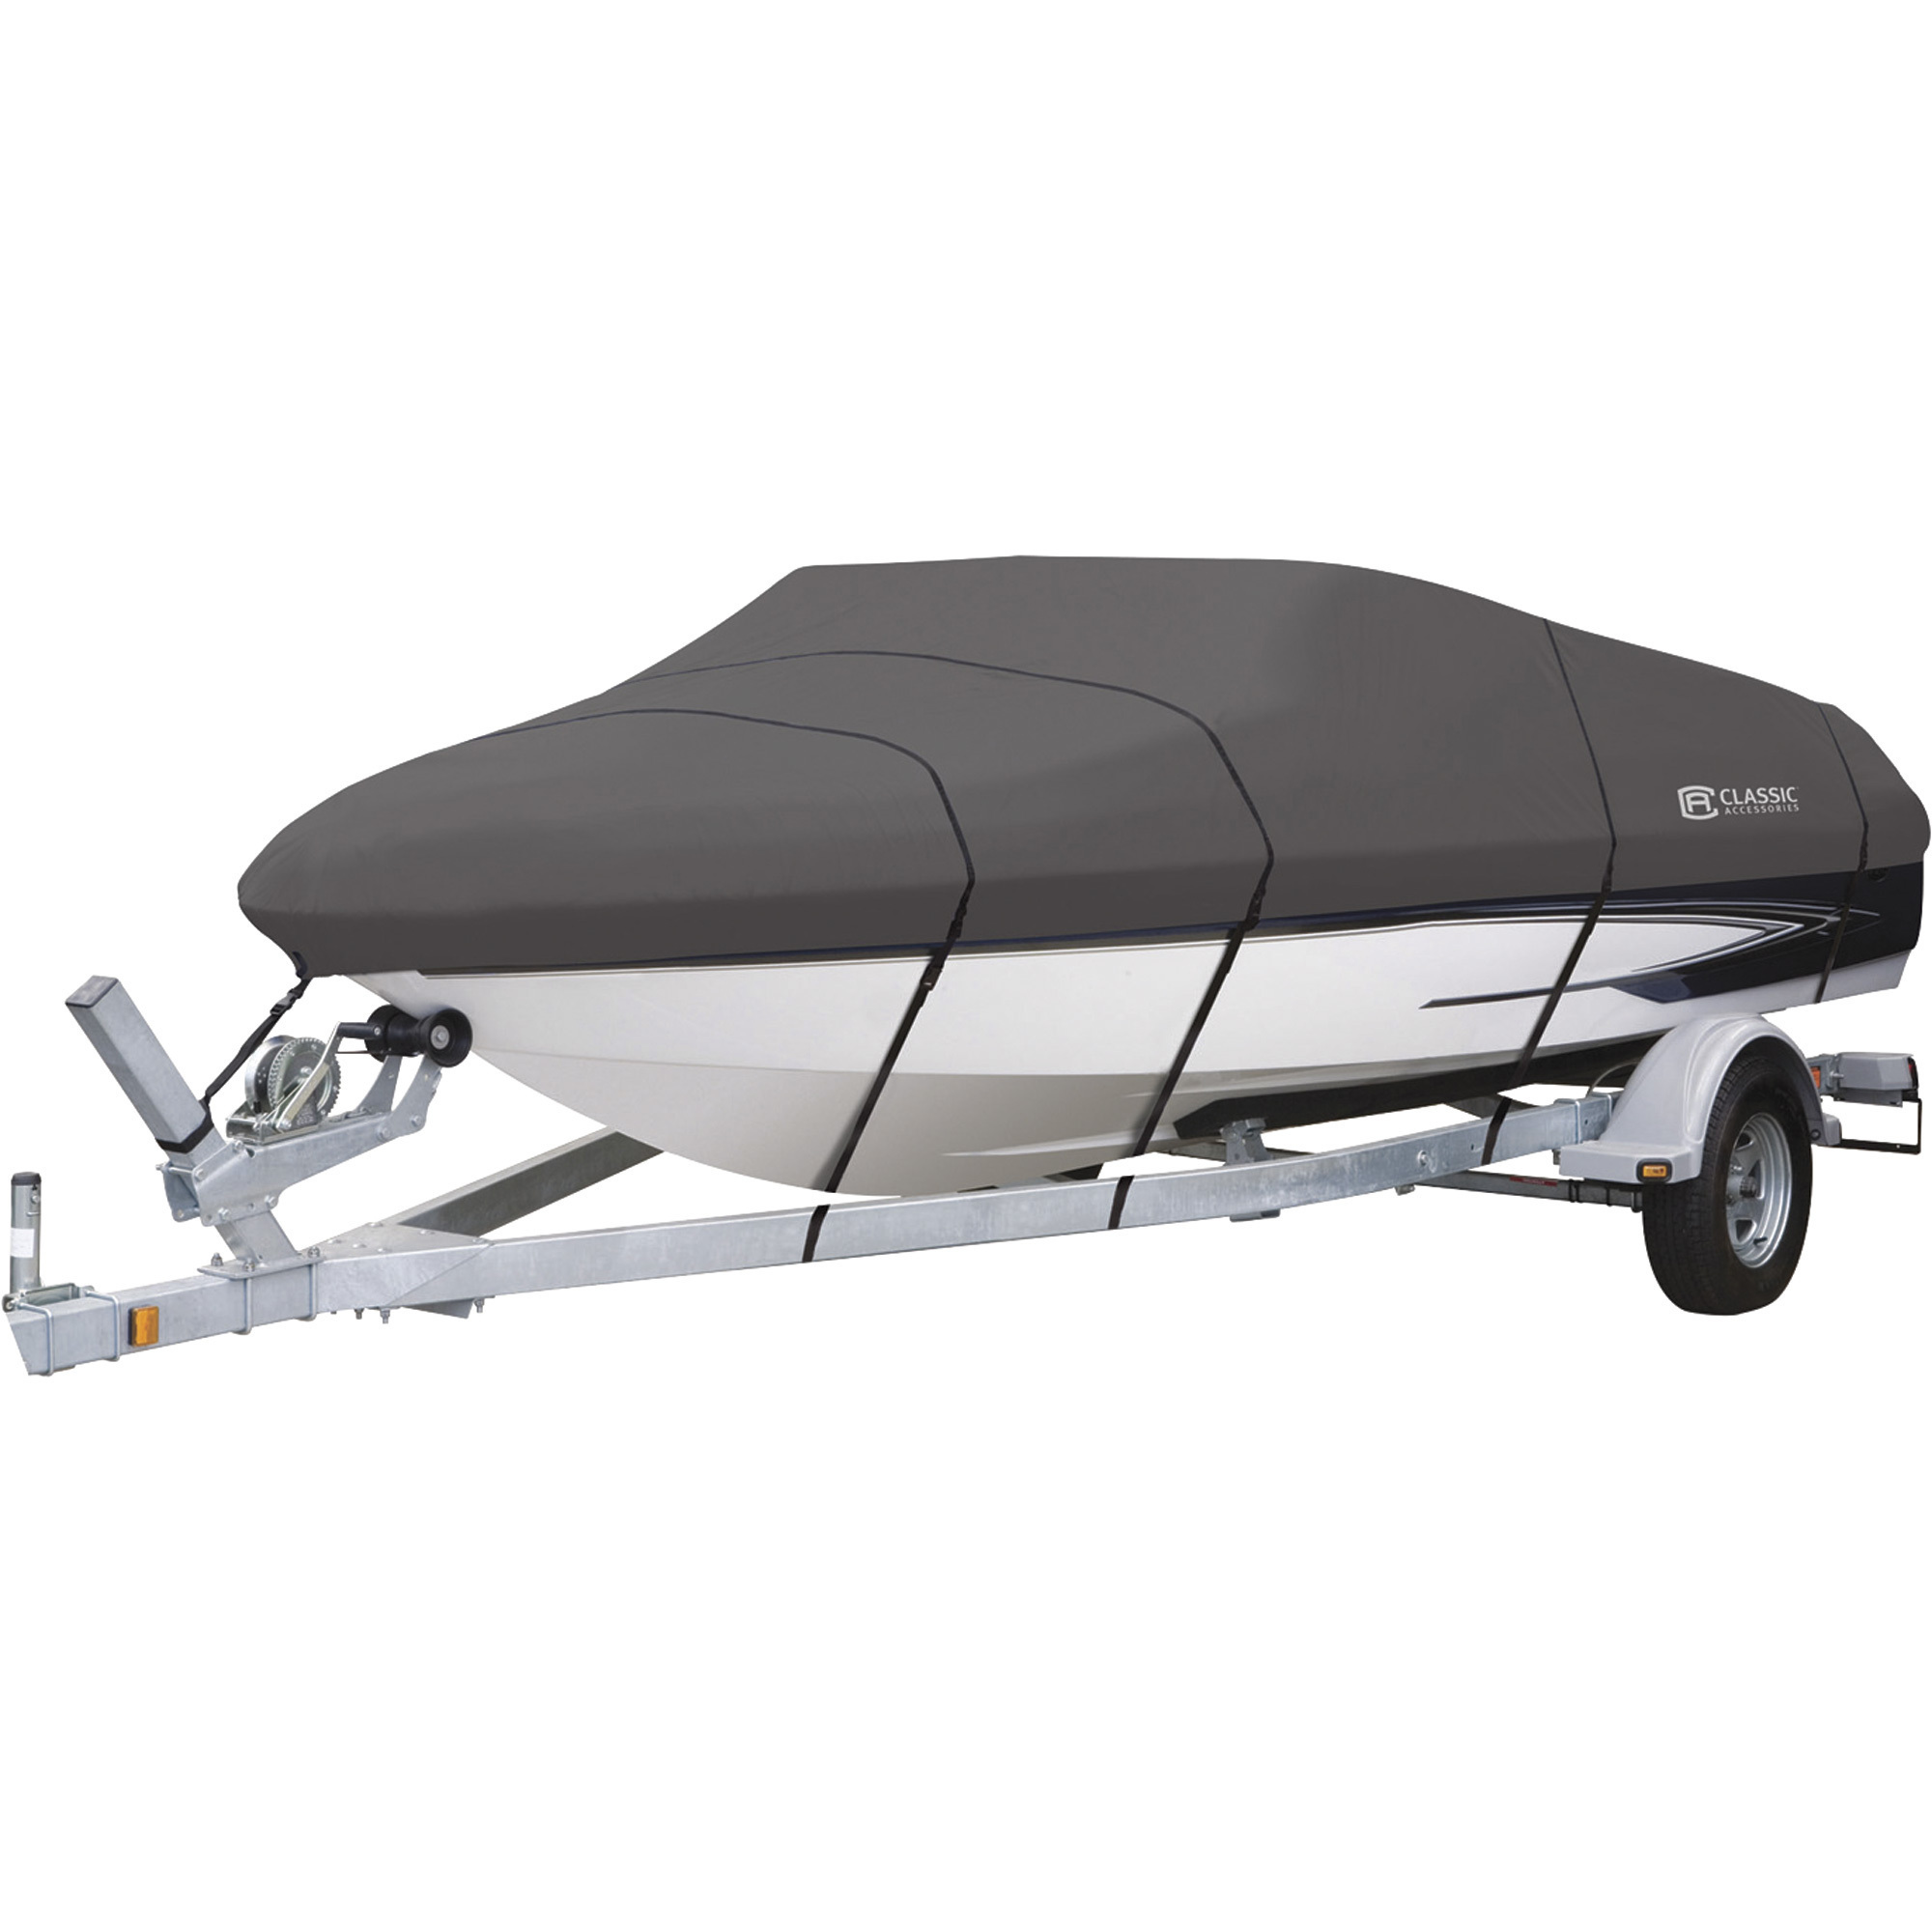 Classic Accessories StormPro Heavy-Duty Boat Cover, Charcoal, Fits 17ft.-19ft. x 98Inch W Boats, Model 88948